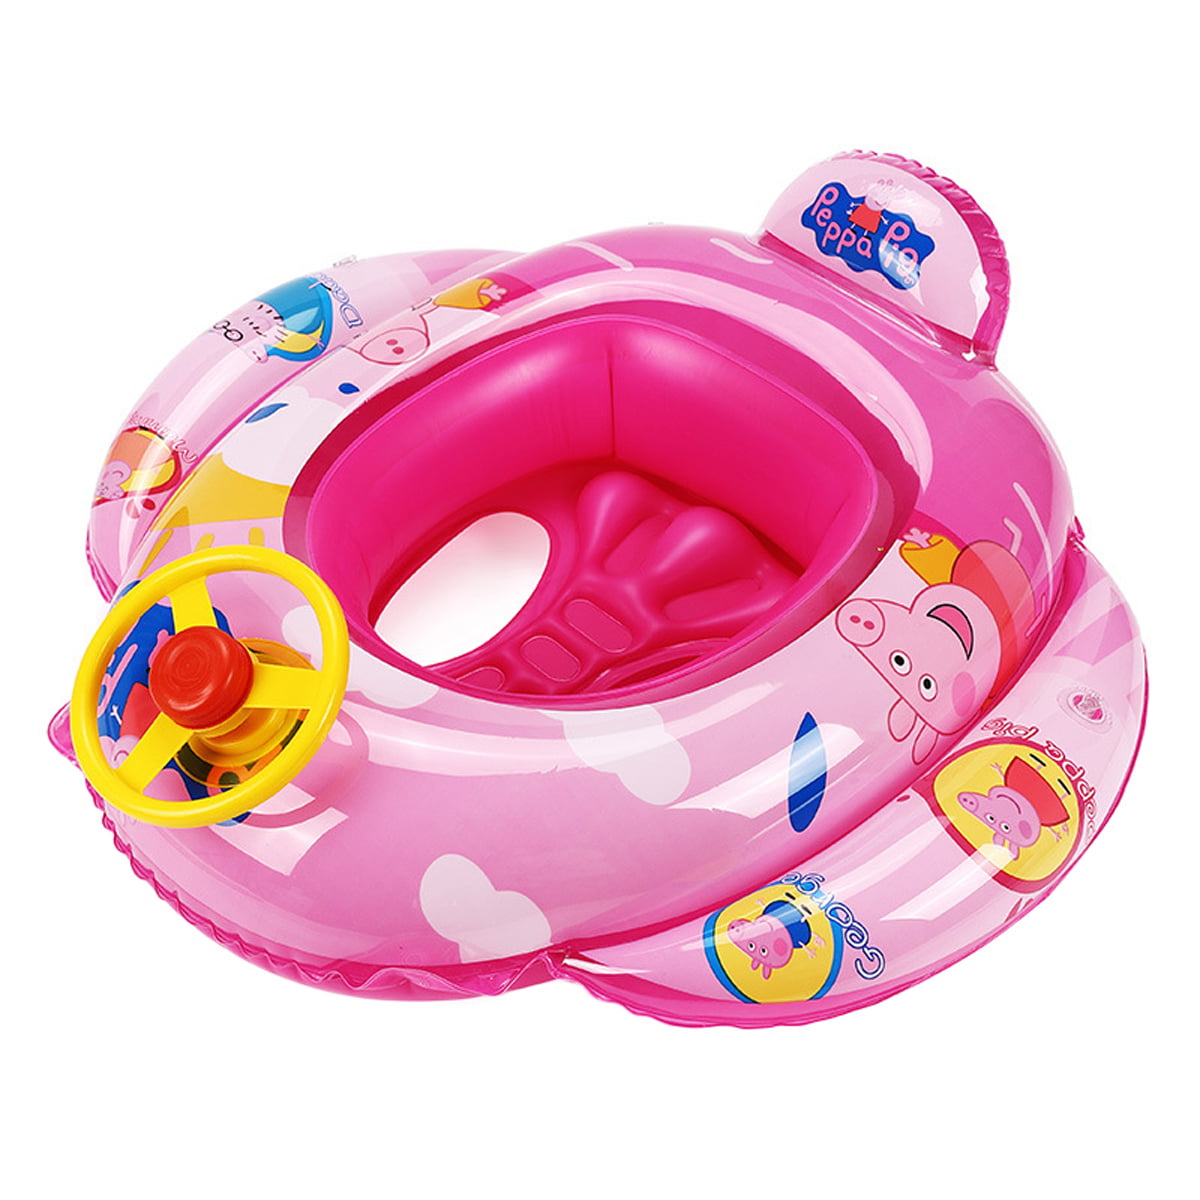 Hello kitty Swimming Pool Float Swim Ring Seat Boat High Quality-FREE SHIPPING 